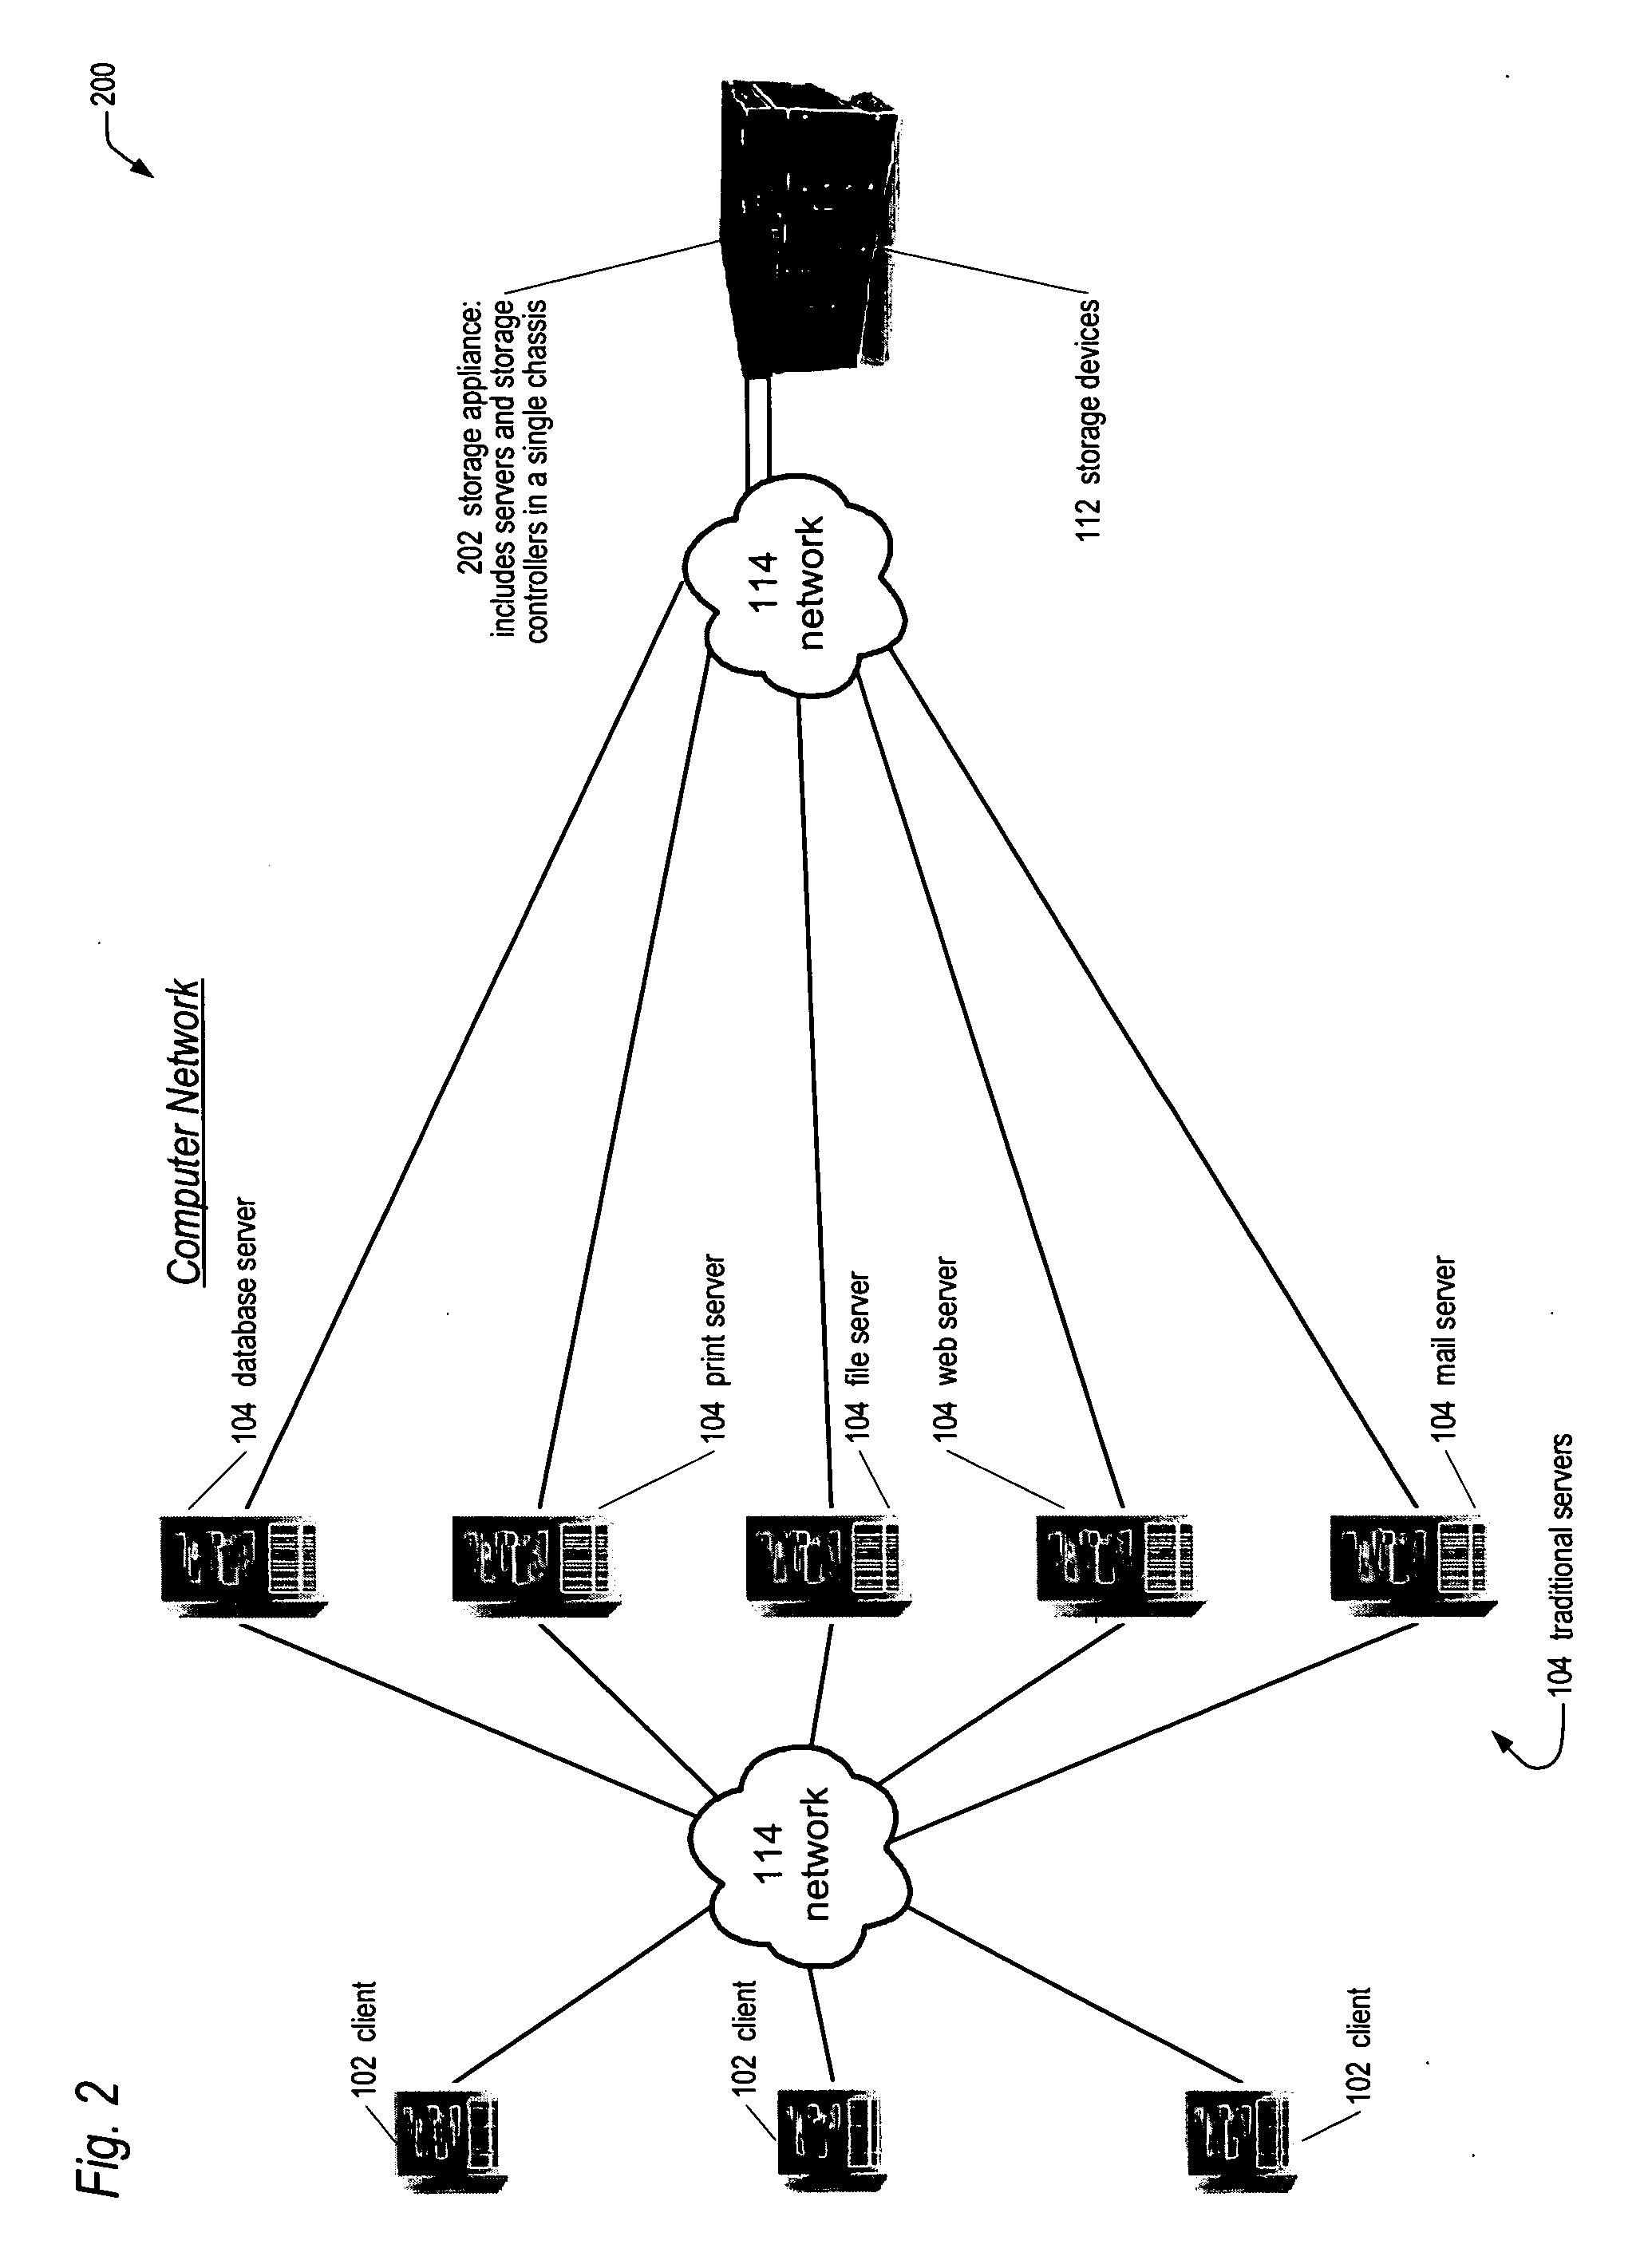 Apparatus and method for deterministically performing active-active failover of redundant servers in a network storage appliance